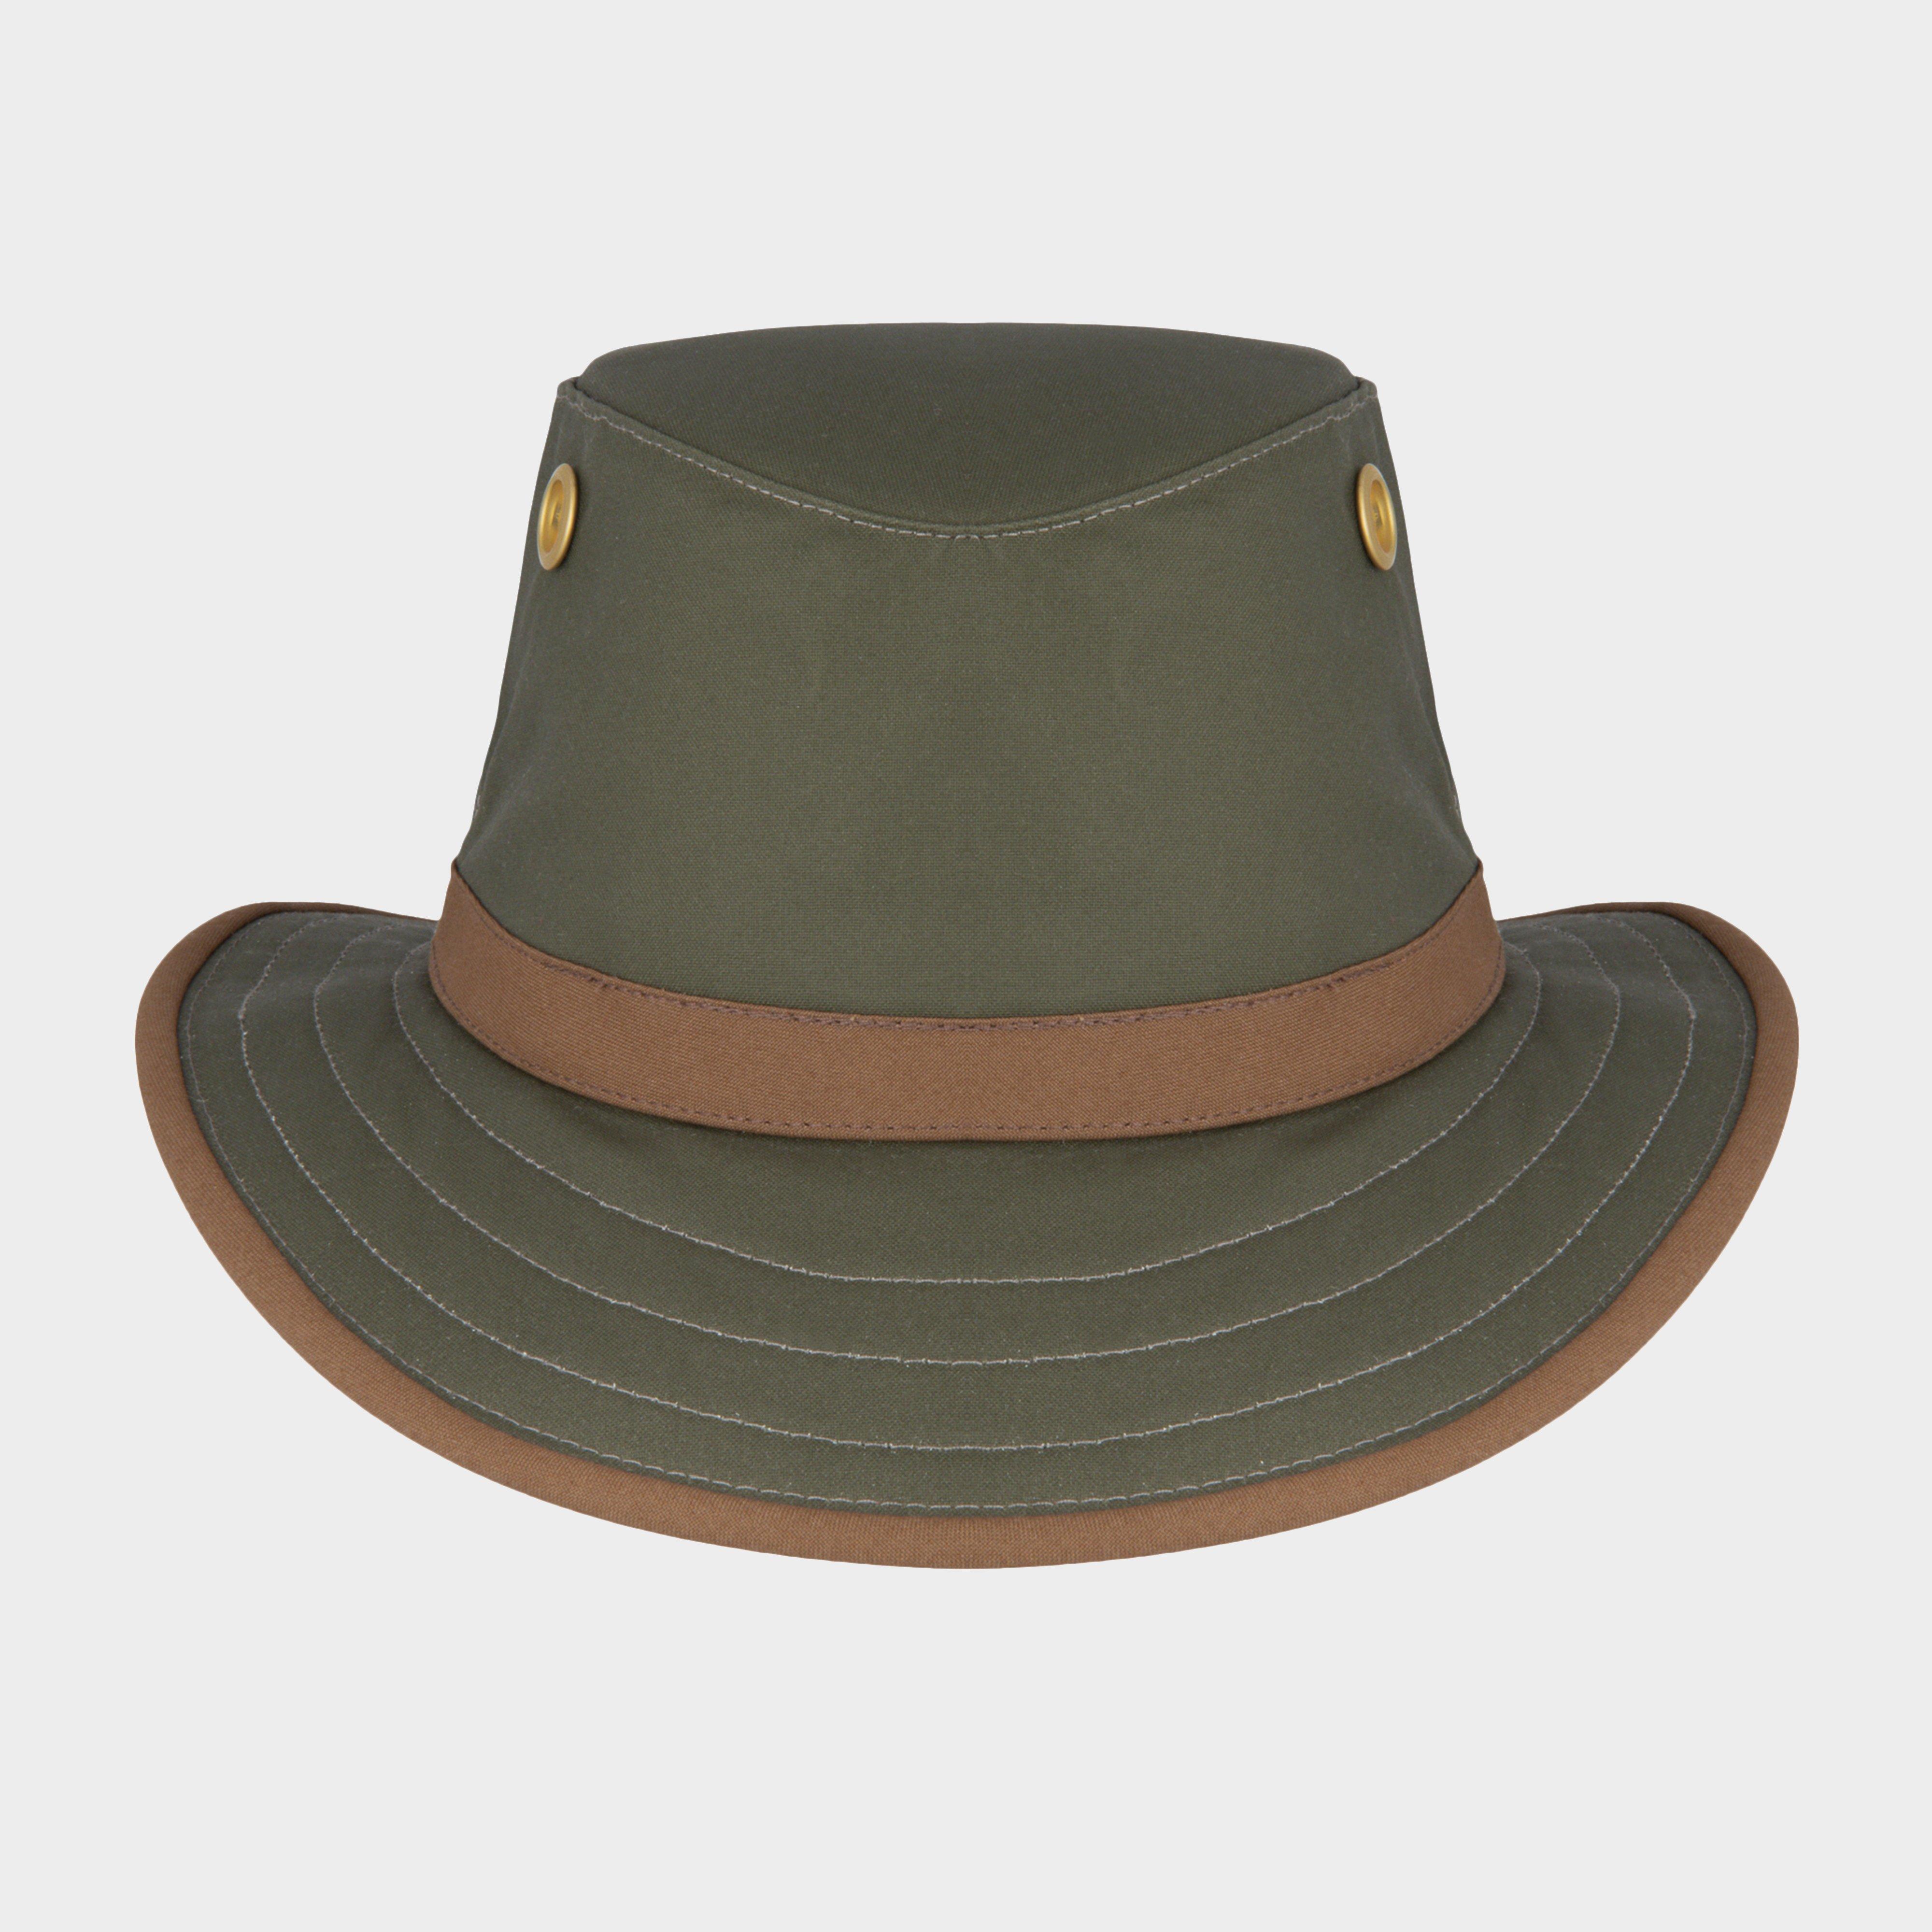  Tilley Outback Waxed Cotton Hat, Green